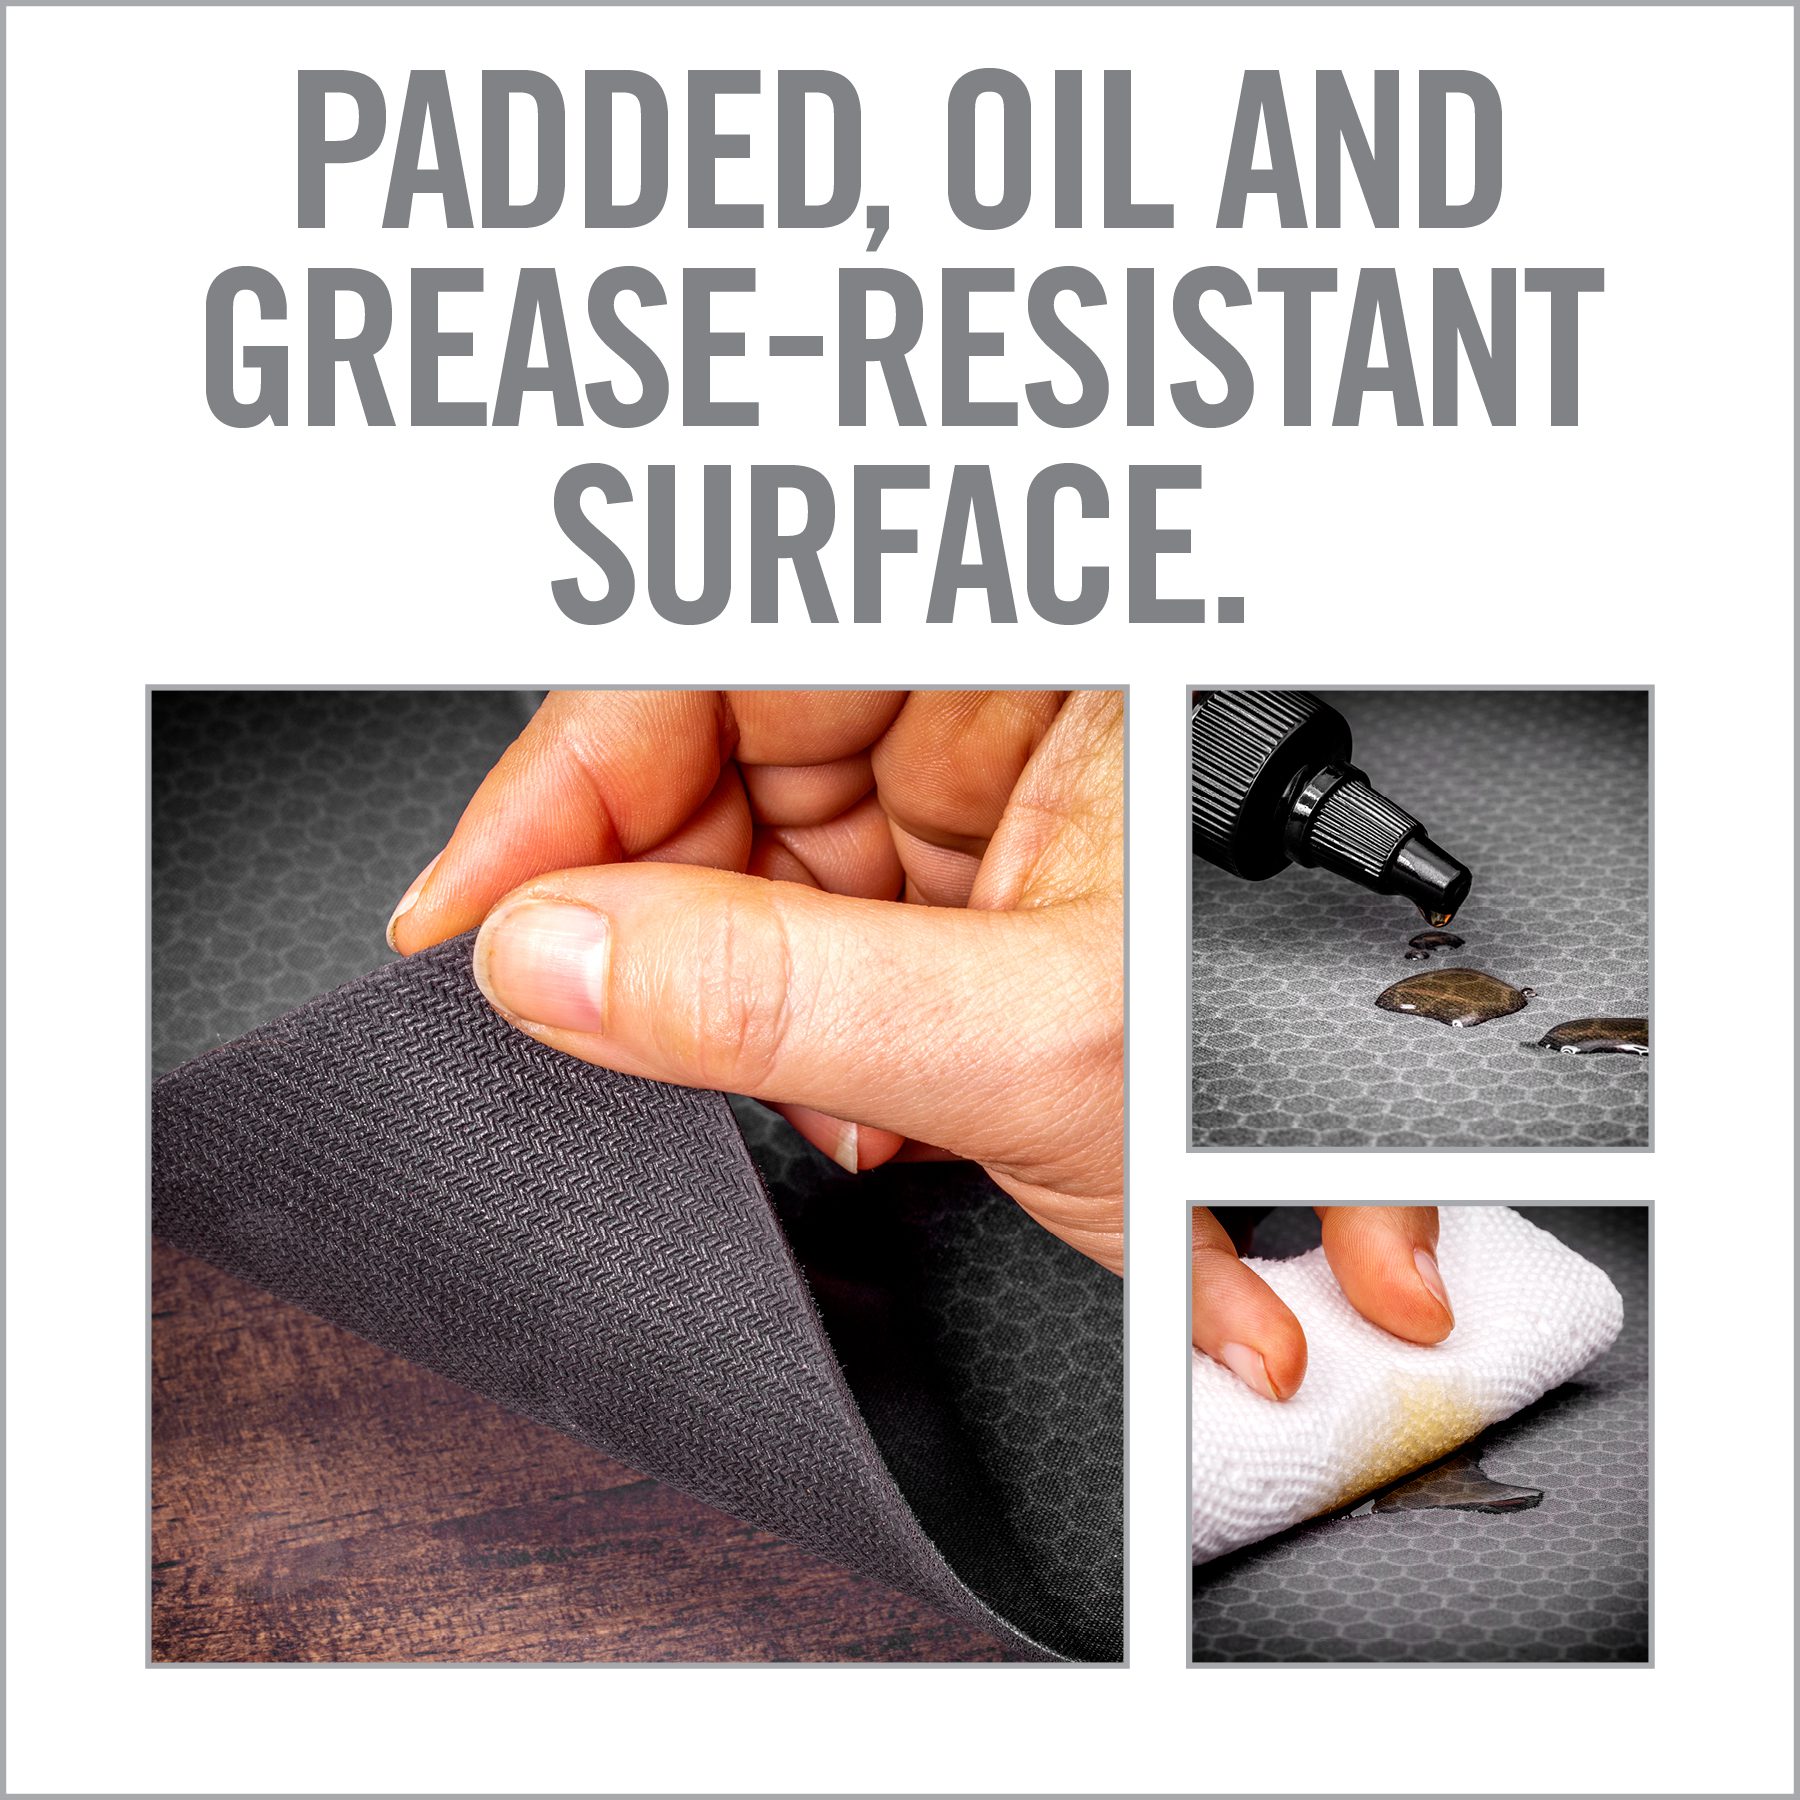 the instructions for how to use an oil and grease resistant surface